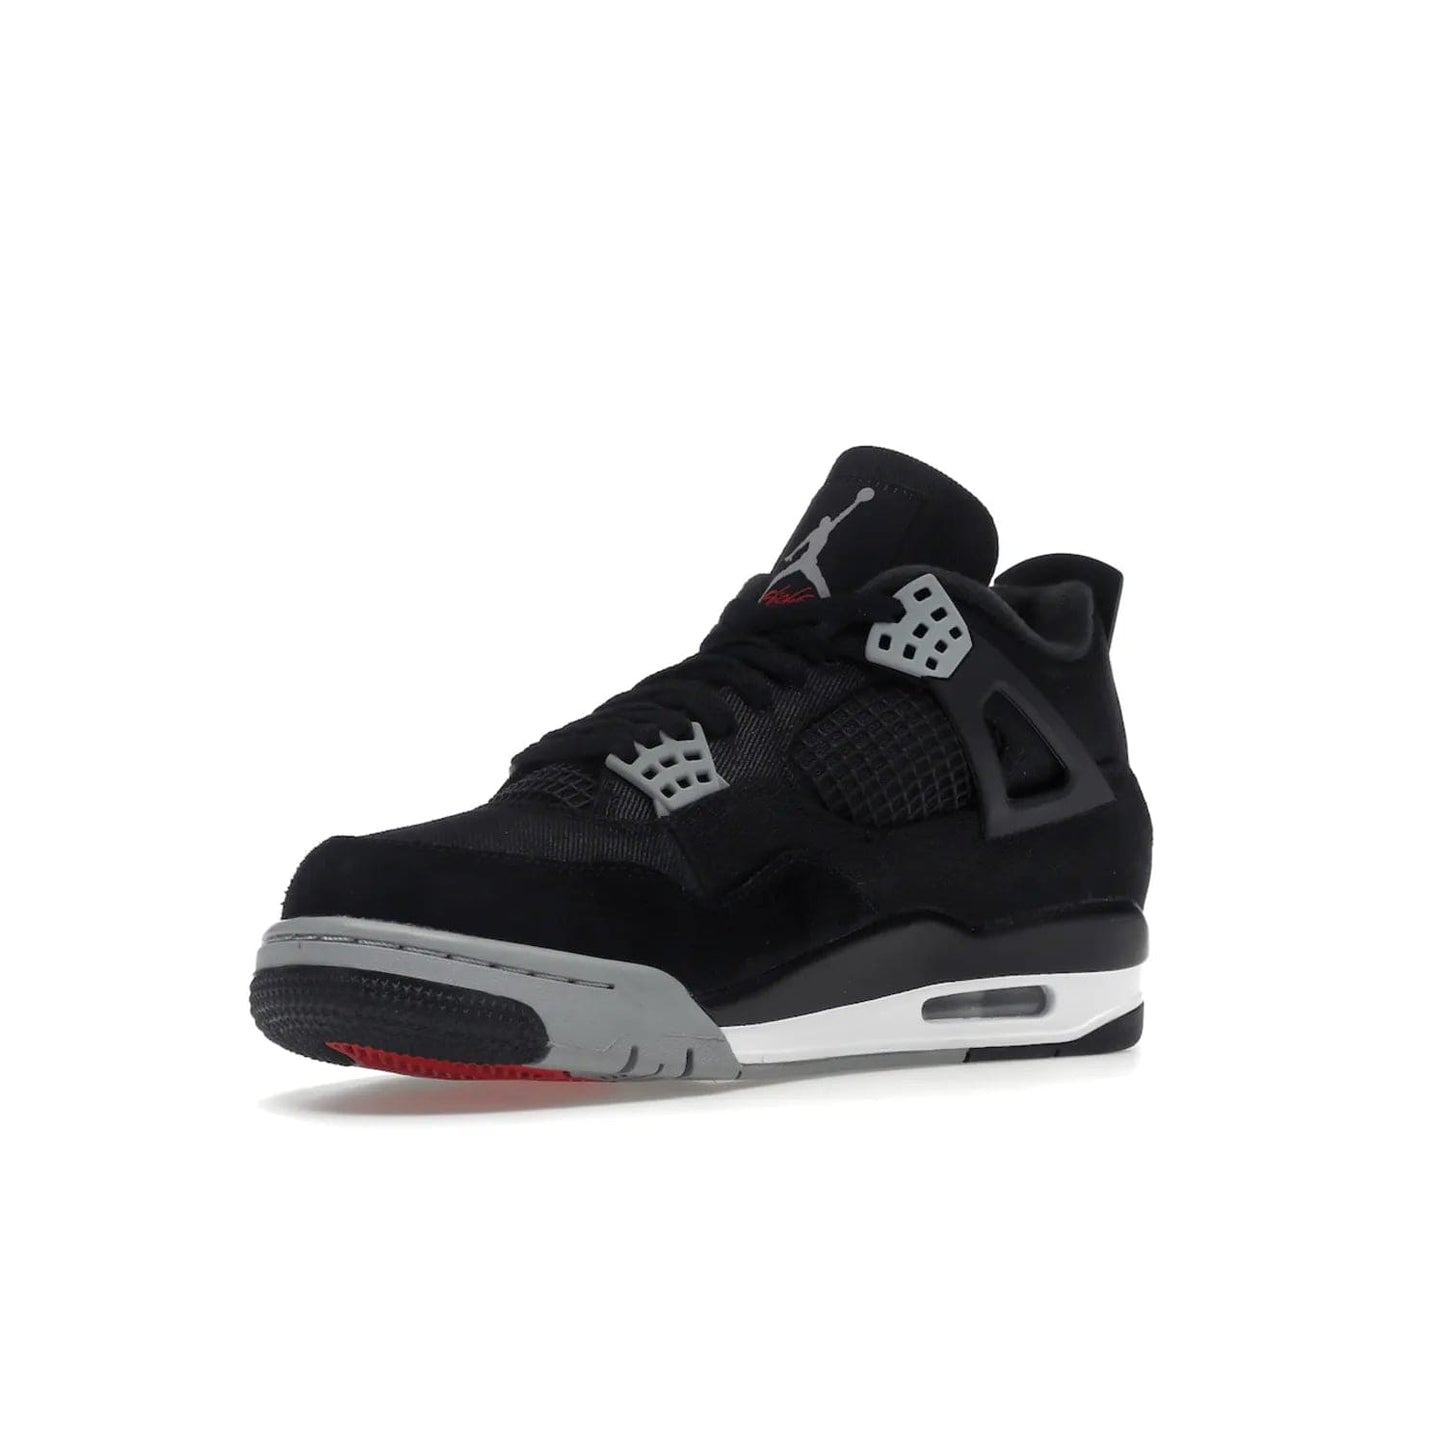 Jordan 4 Retro SE Black Canvas - Image 15 - Only at www.BallersClubKickz.com - The Air Jordan 4 Retro SE Black Canvas brings timeless style and modern luxury. Classic mid-top sneaker in black canvas and grey suede with tonal Jumpman logo, Flight logo and polyurethane midsole with visible Air-sole cushioning. Refresh your sneaker collection and rock the Air Jordan 4 Retro SE Black Canvas.